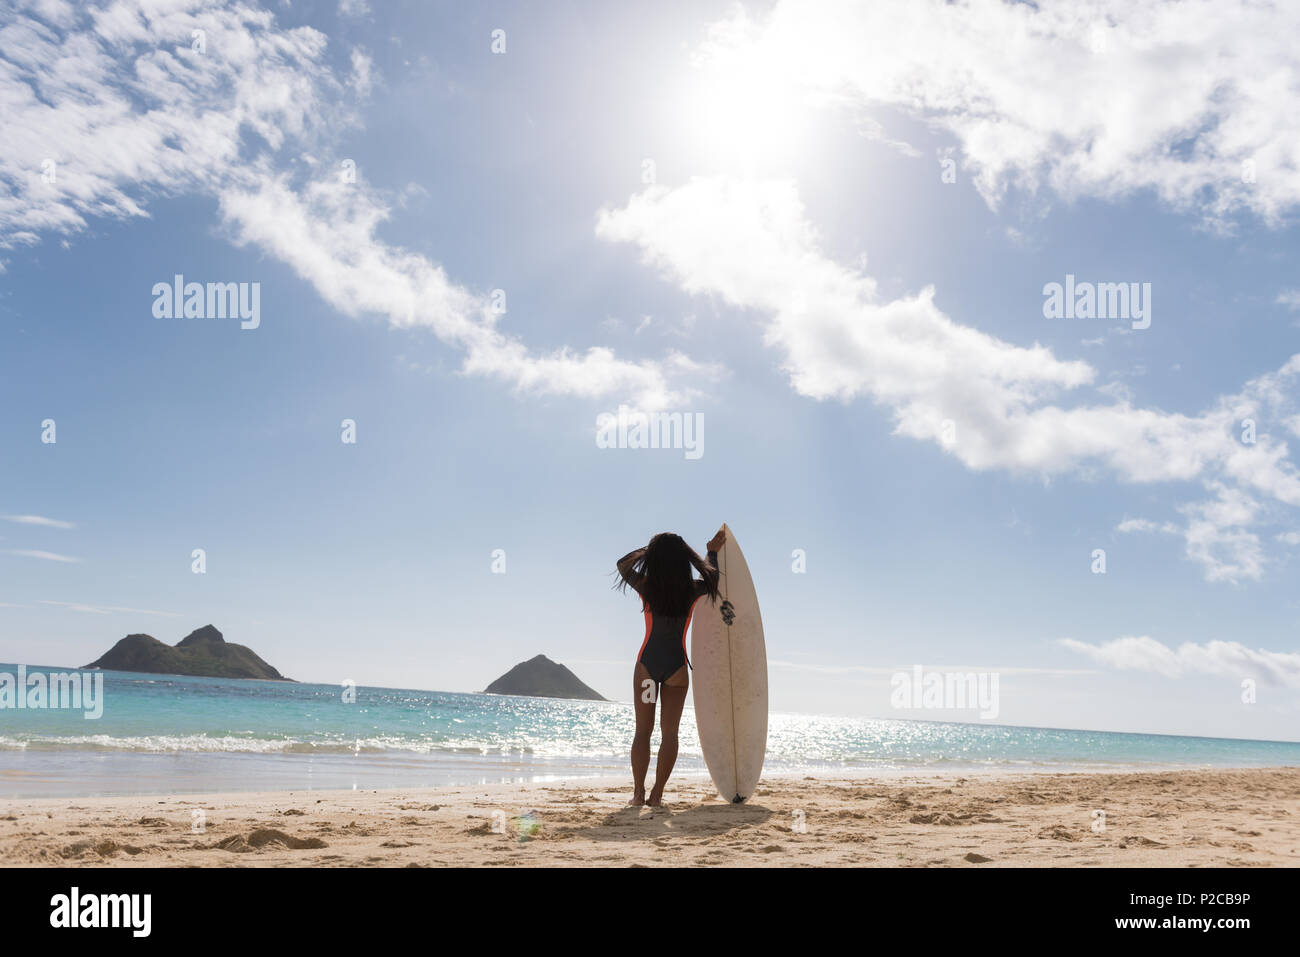 Woman standing with surfboard in the beach Stock Photo